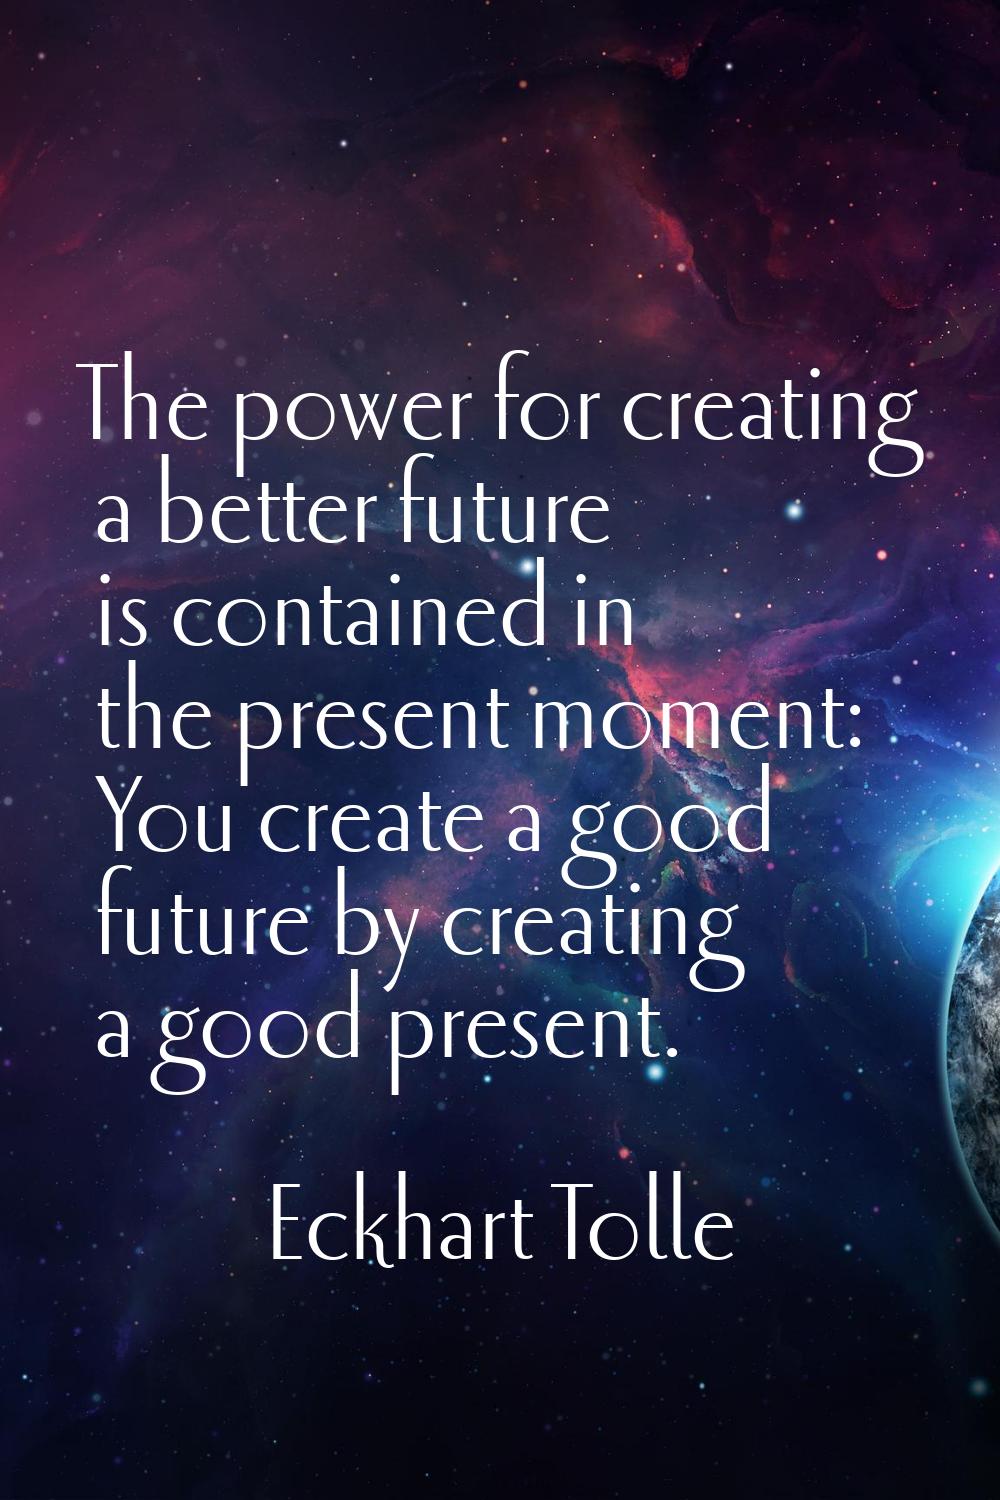 The power for creating a better future is contained in the present moment: You create a good future